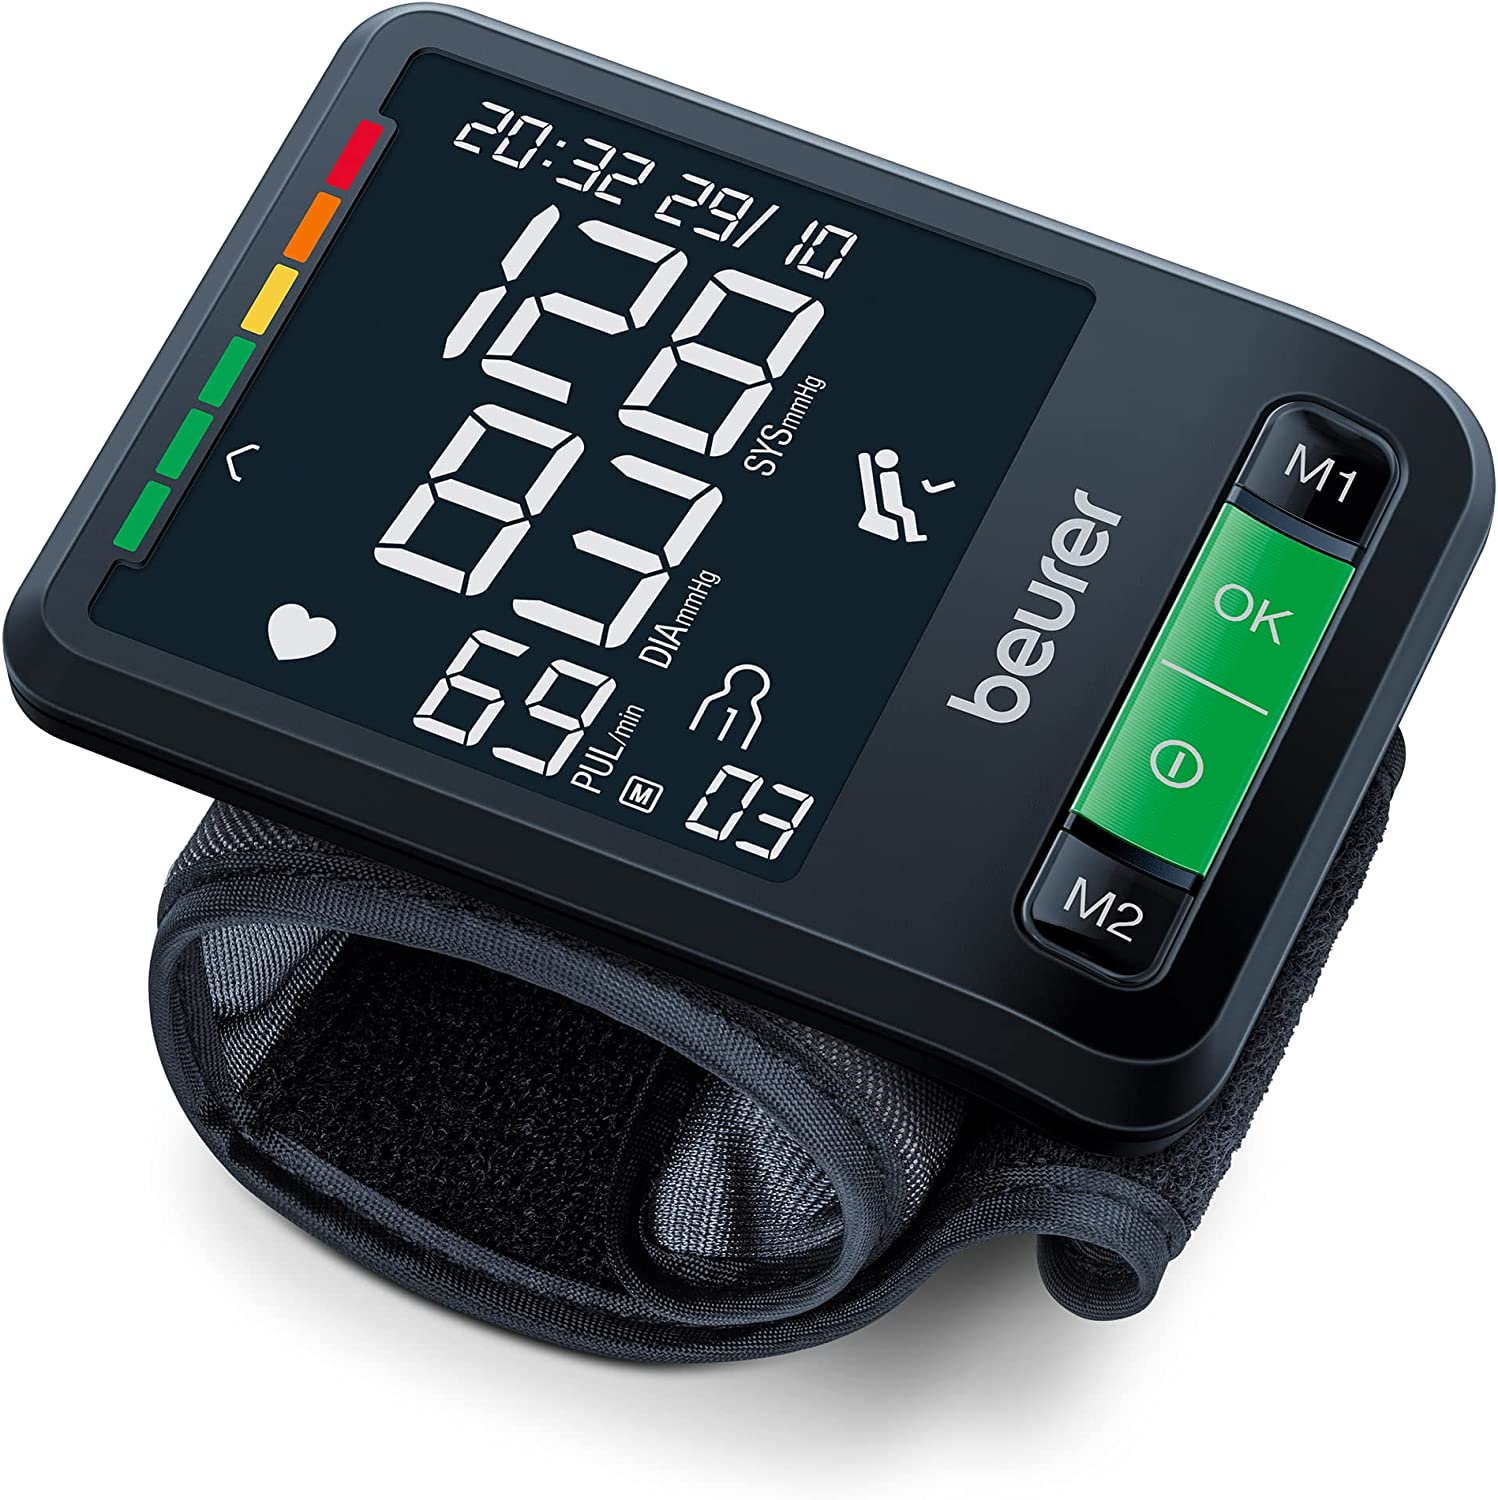 Beurer BC 87 Wrist Blood Pressure Monitor with App Connection, XL Display, Sleep Indicator, Inflation Technology, Colour Risk Indicator and Arrhythmia Detection